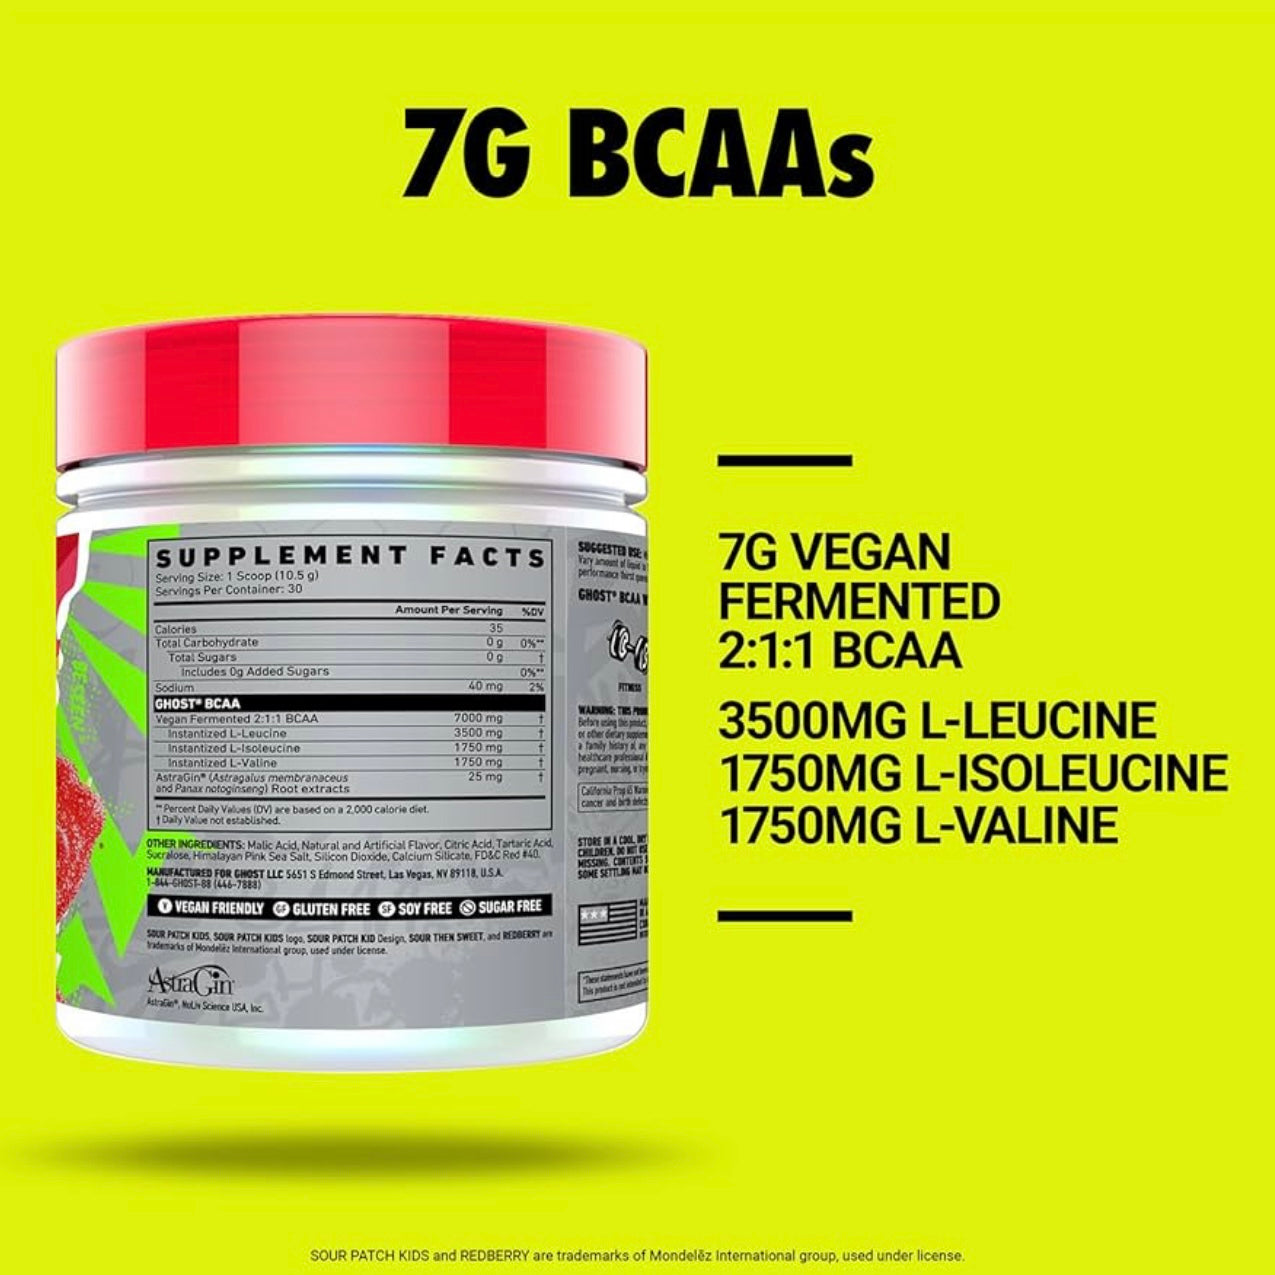 GHOST BCAA Powder Amino Acids Supplement, Sour Patch Kids Blue Raspberry - 30 Servings